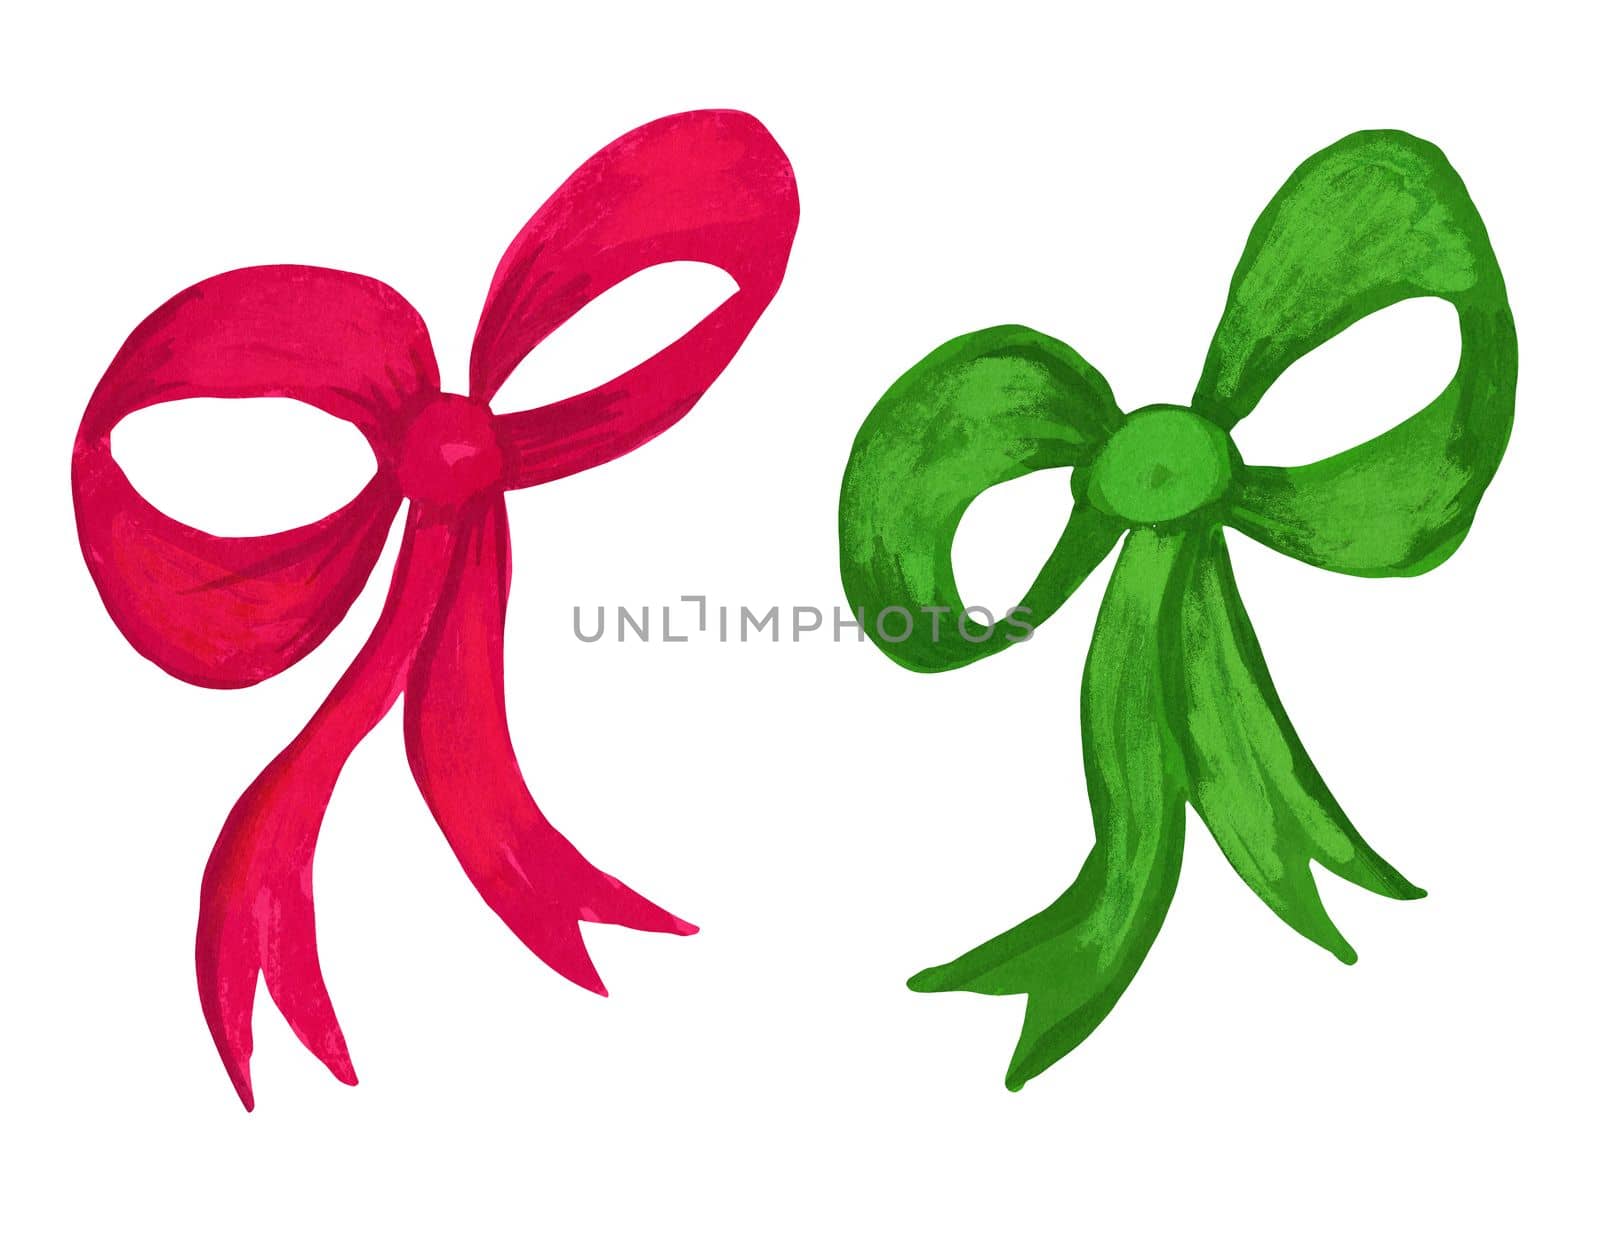 Watercolor hand drawn illustration of red green christmas ribbon bows. Cute bright minimalist decor for winter holiday greeting cards invitations, retro vintage ornament, simple minimalist style.